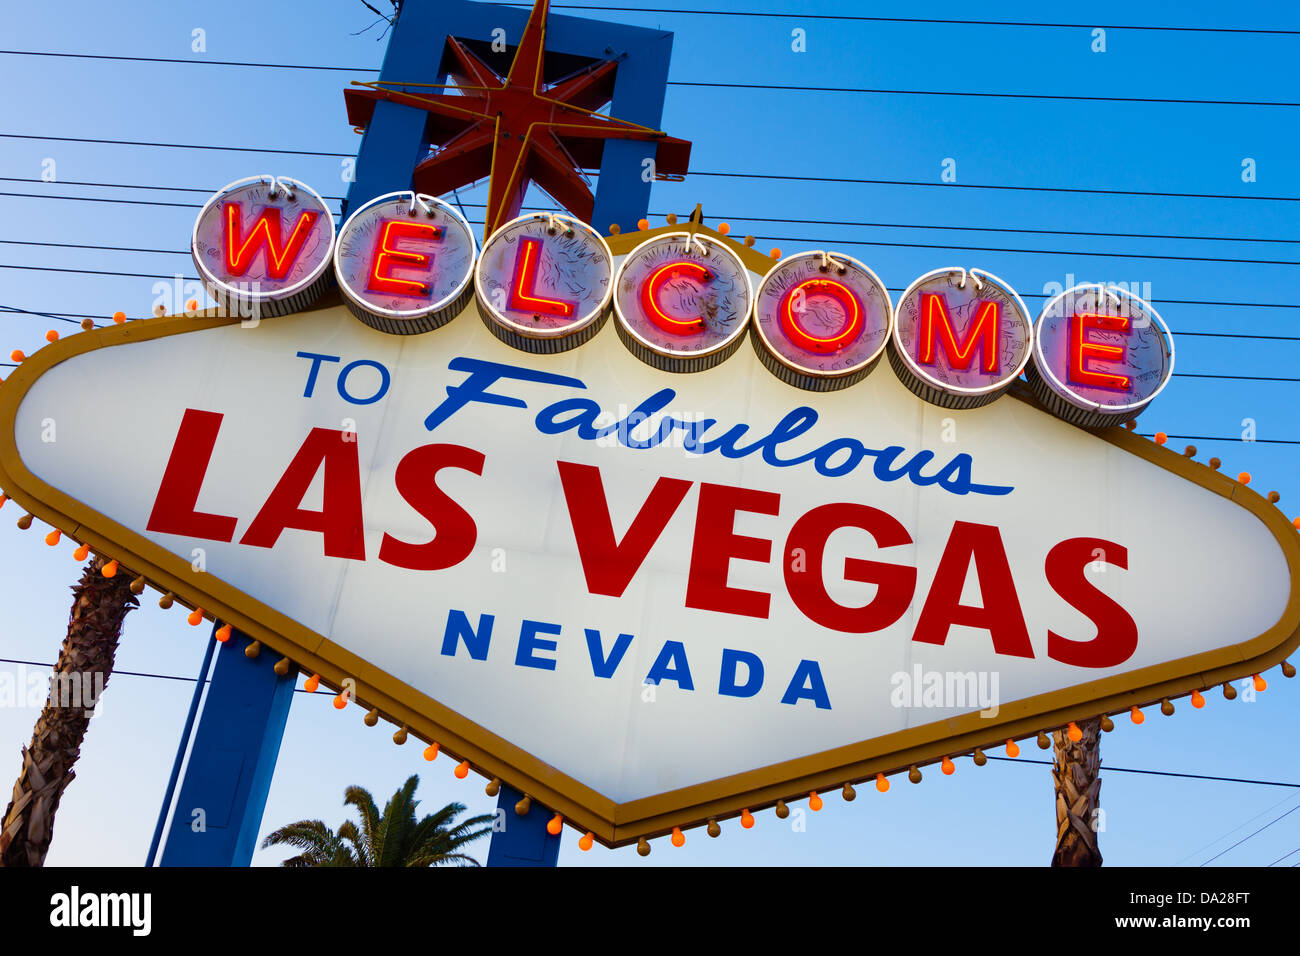 Welcome to Fabulous Las Vegas sing with a sky blue background Stock Photo